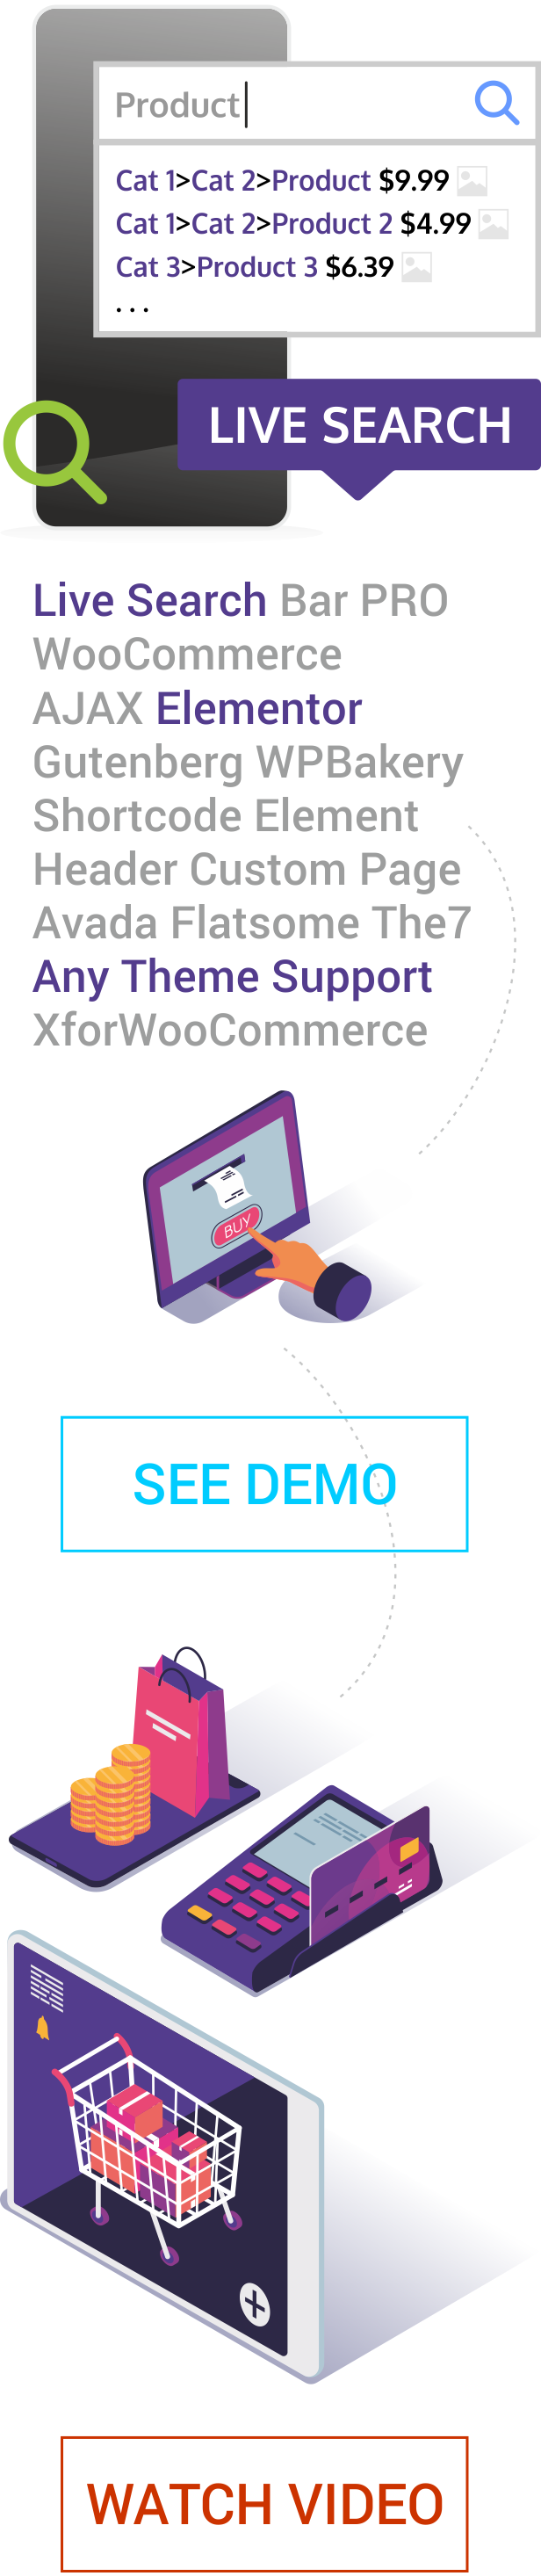 Live Search for WooCommerce - 2